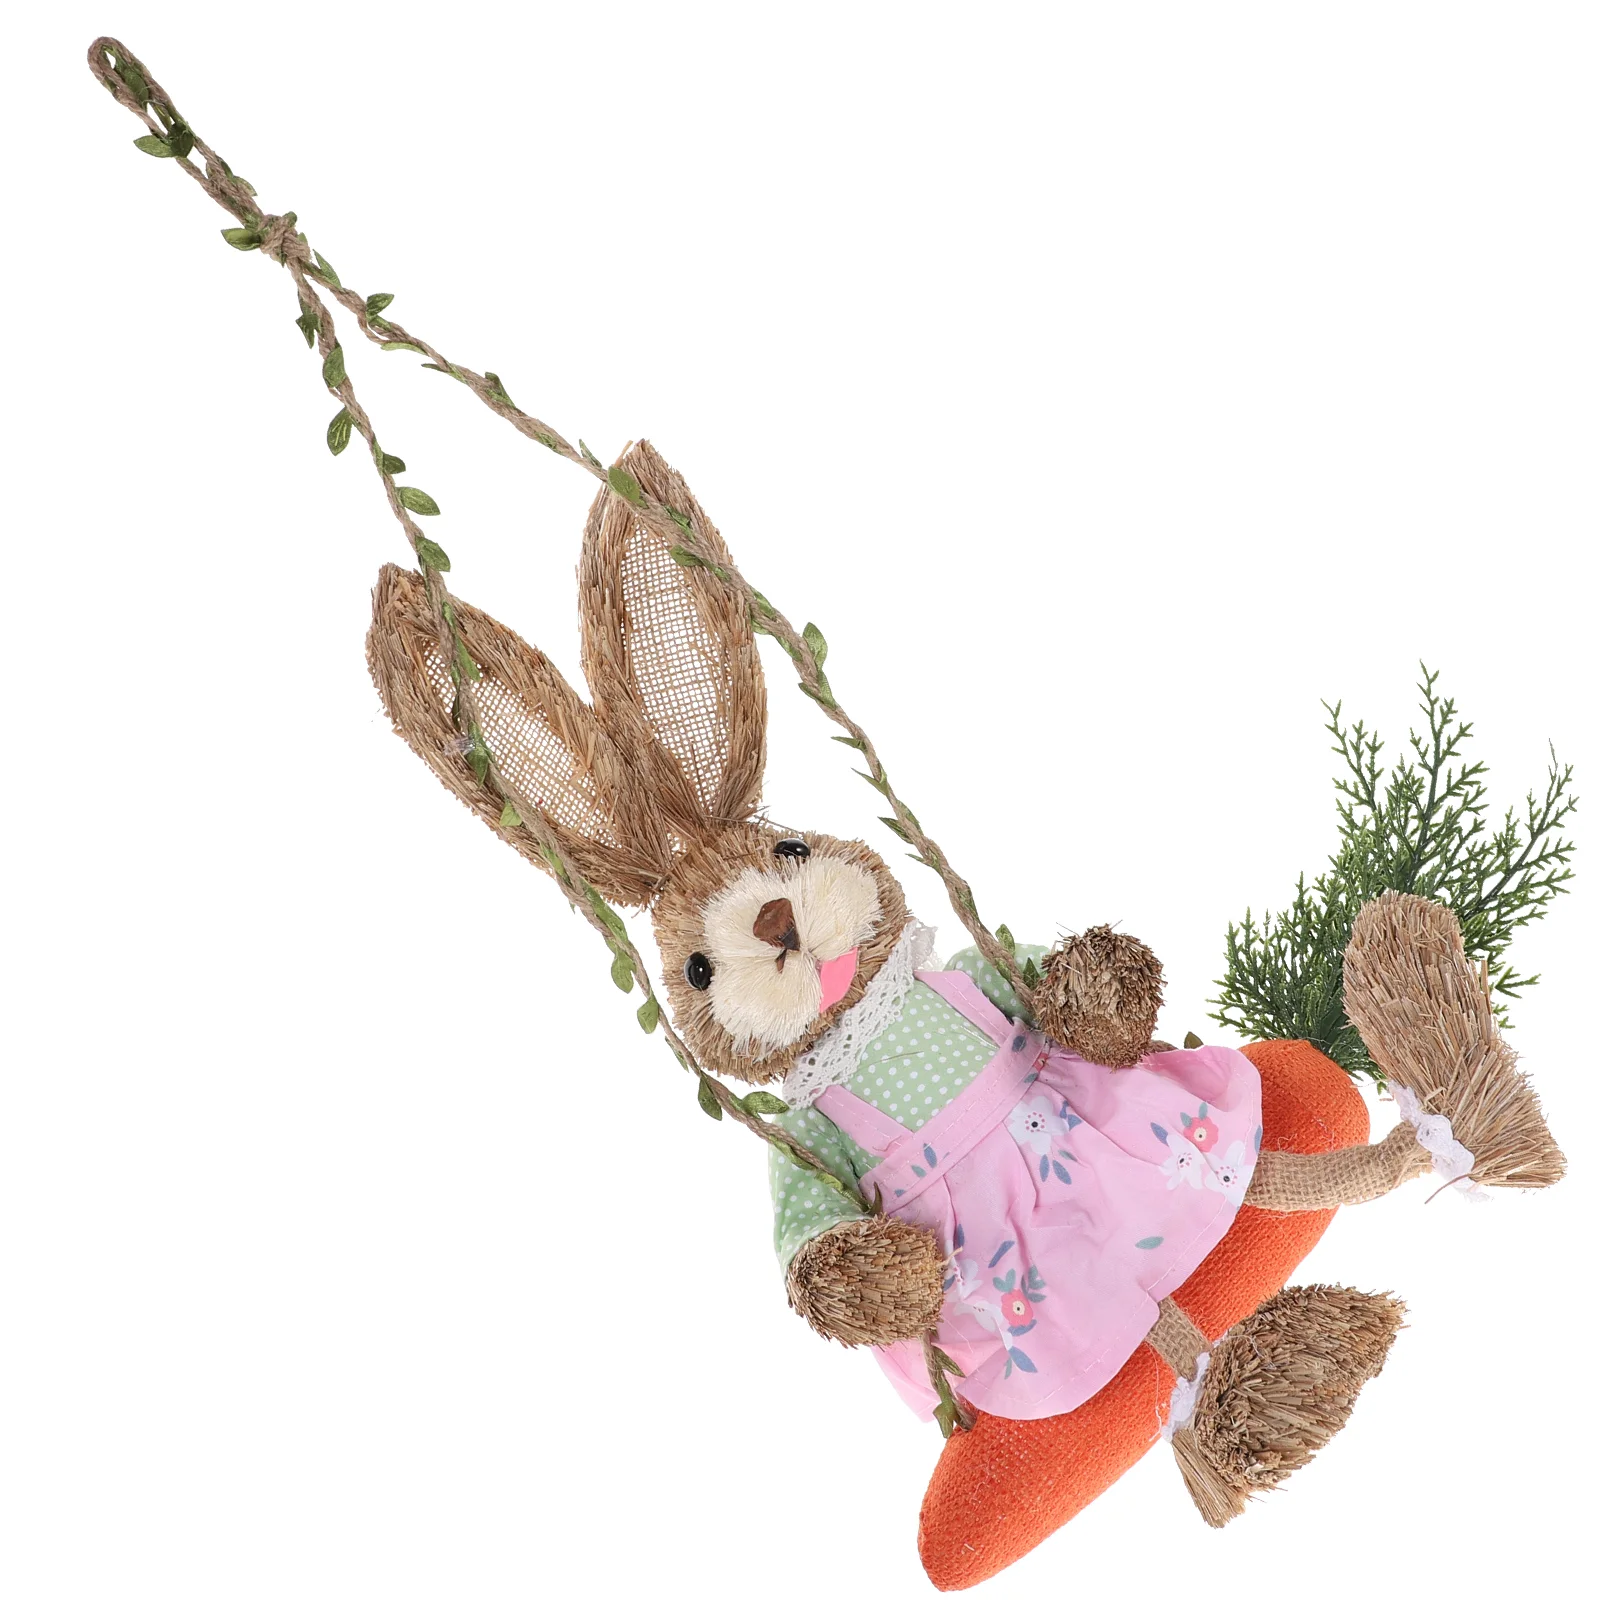 

Bunny Easter Decor Straw Rabbit Decorations Spring Figurines Ornament Figurine Standing Statues Hanging Ornaments Swing Wall